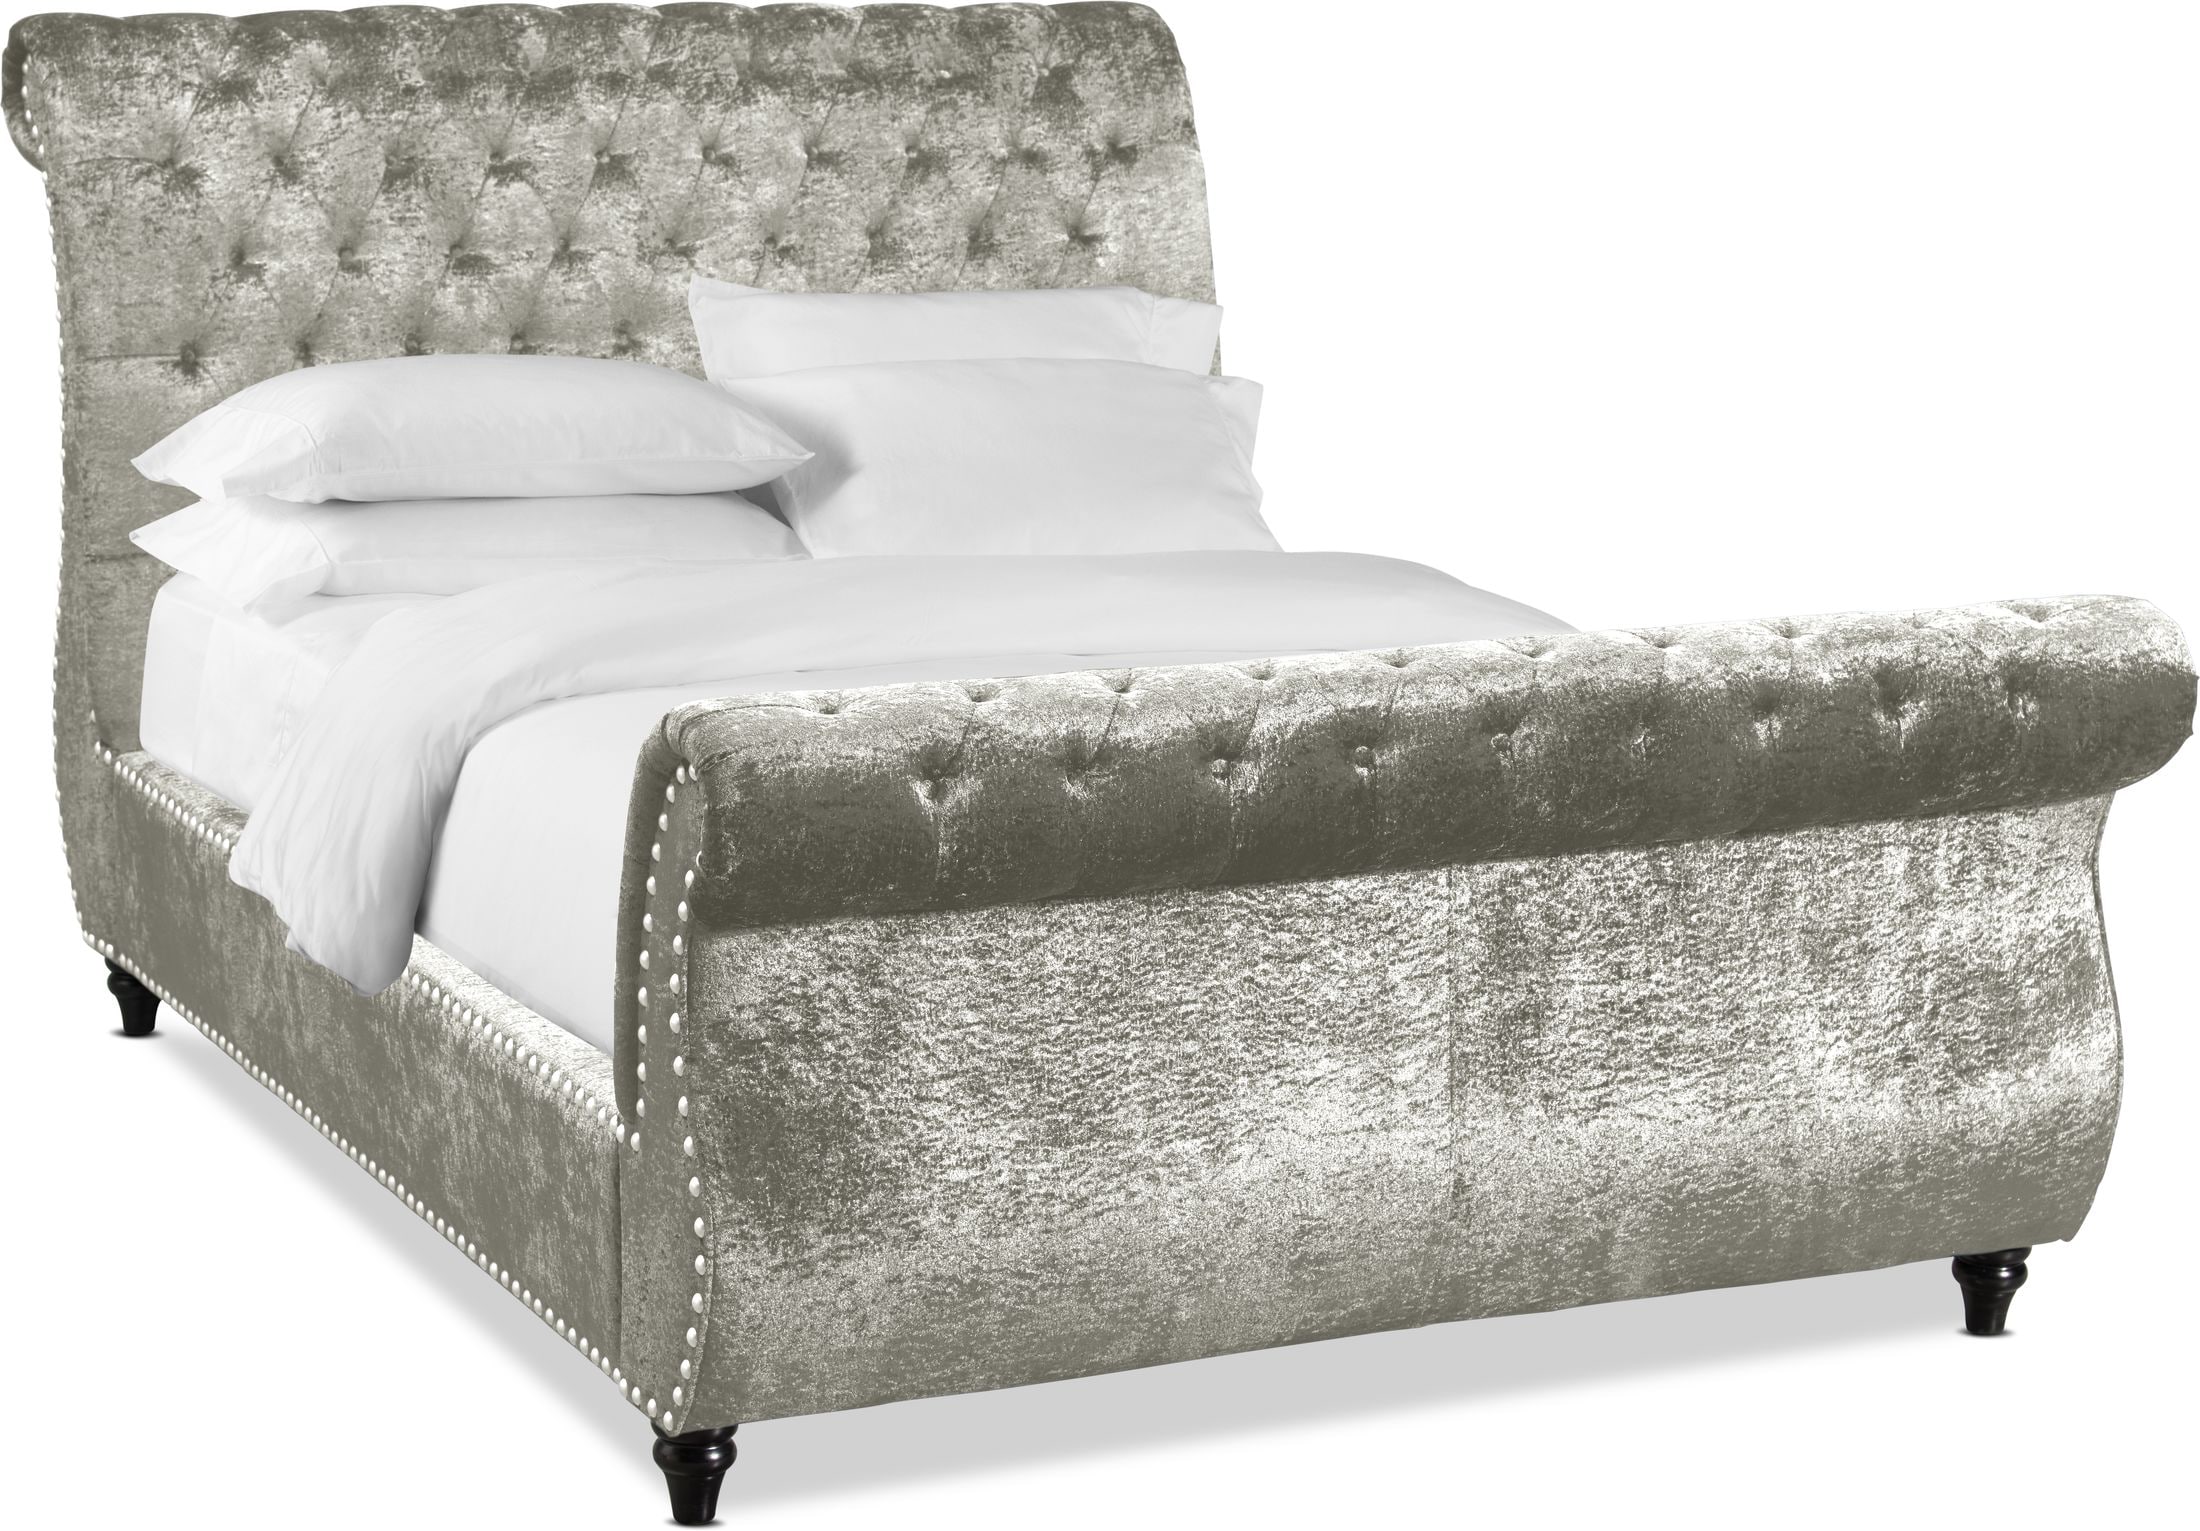 Undefined Value City Furniture, American Signature King Bed